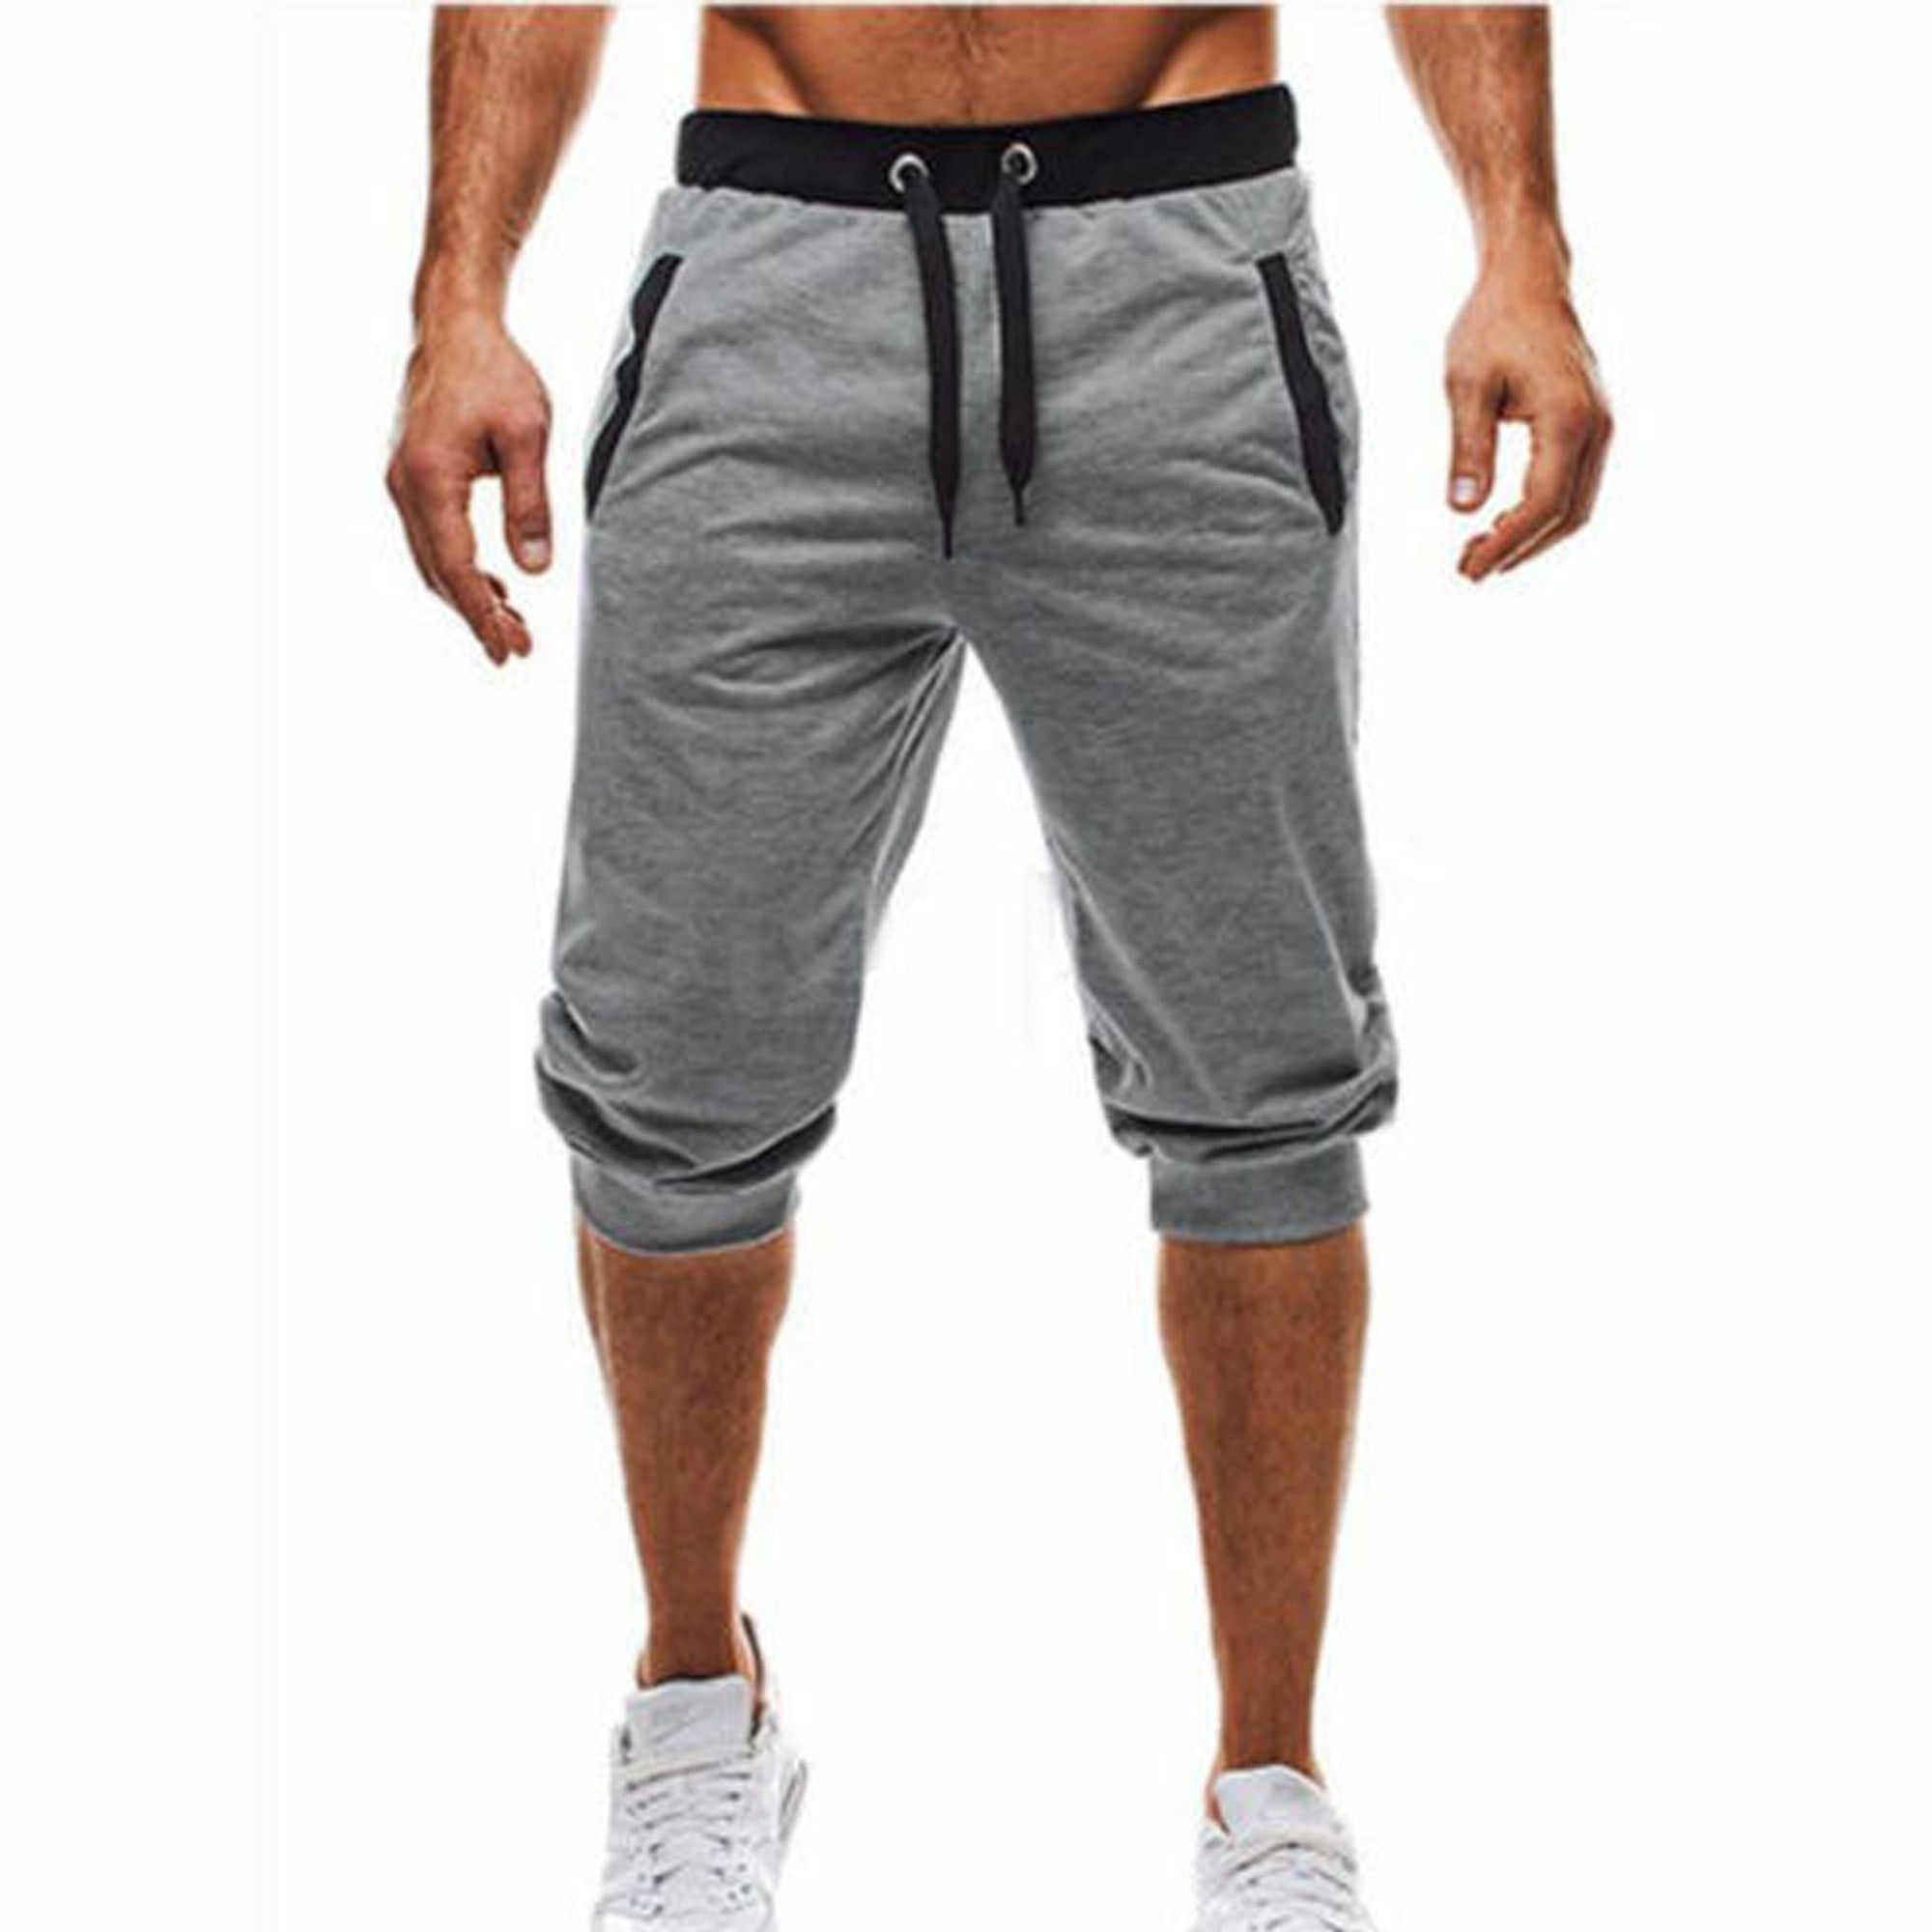 Stripes Mens Beach Shorts Quick Dry Sports Pants with 3 Pockets 